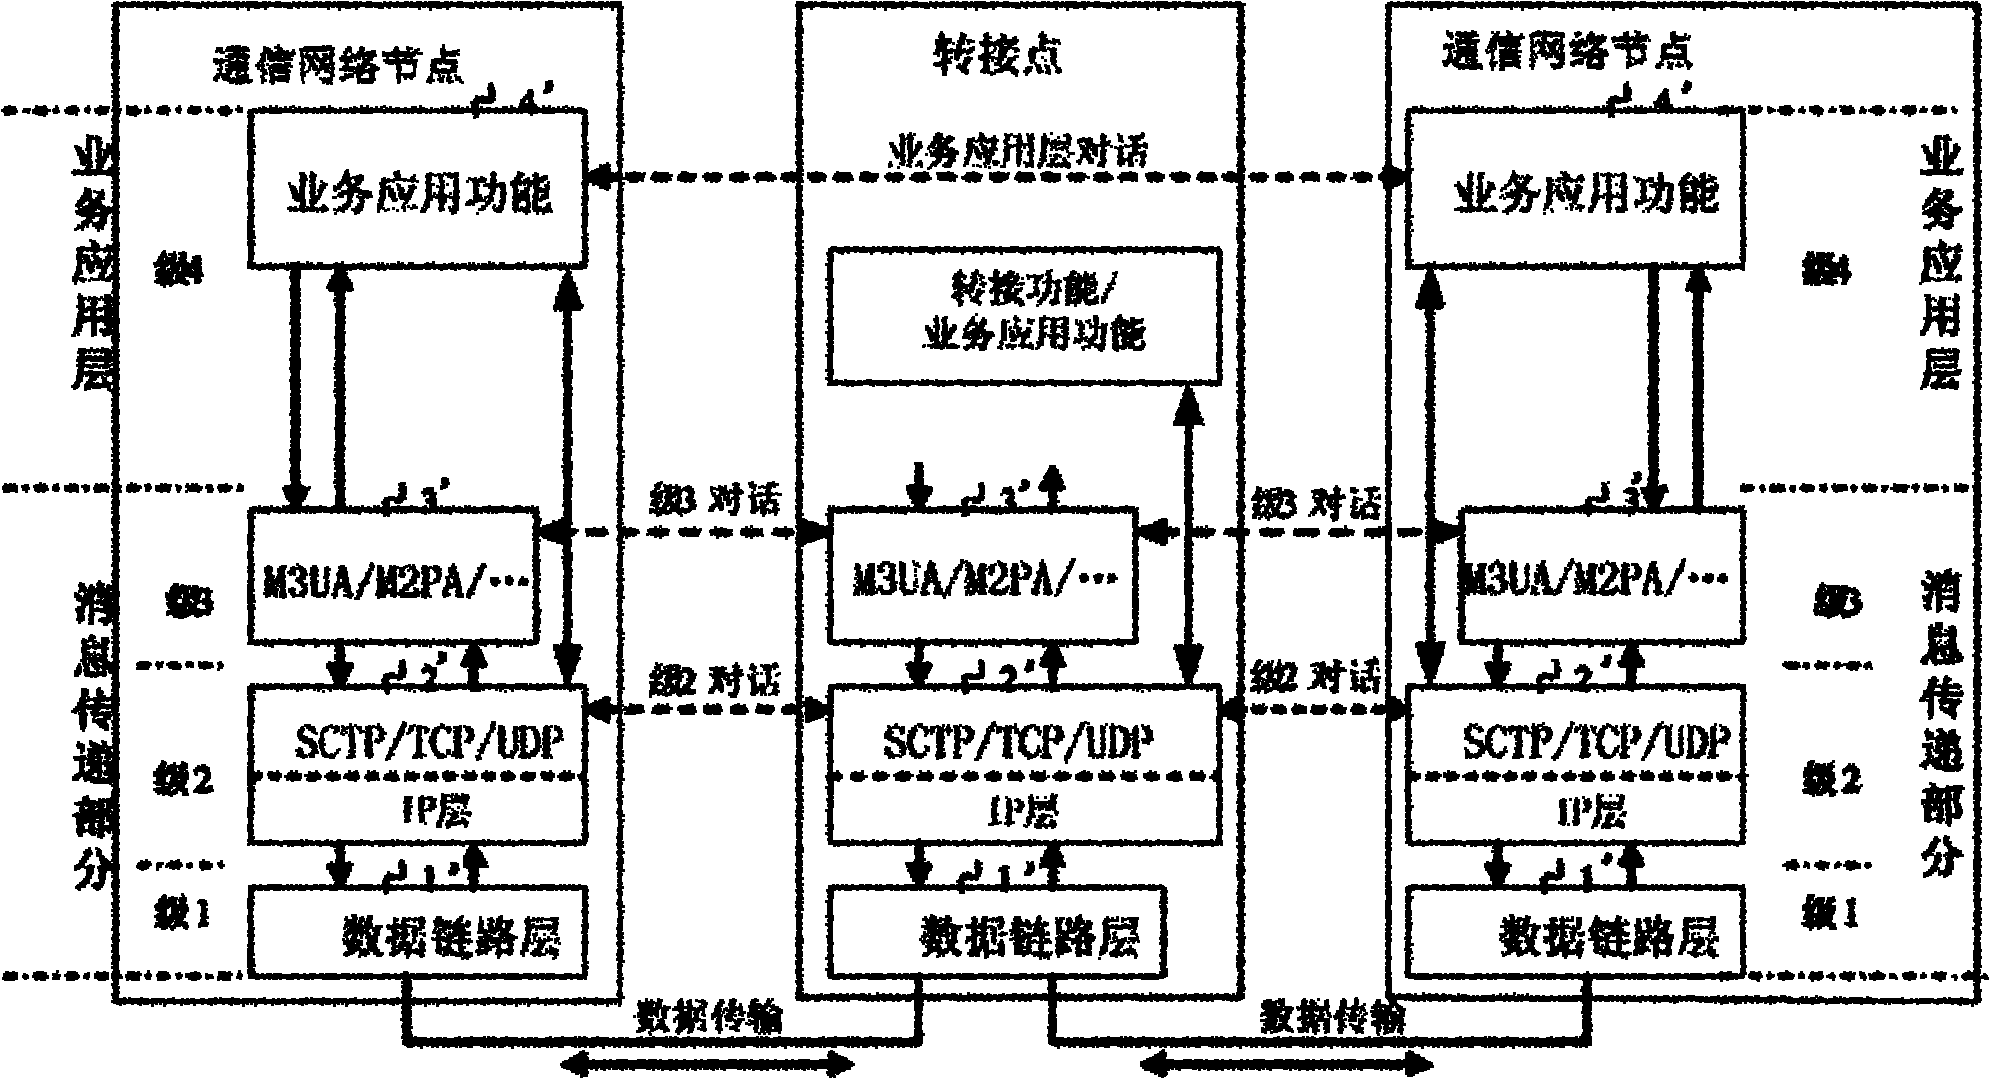 Recognition processing method and device for signaling data on IP data link function layer